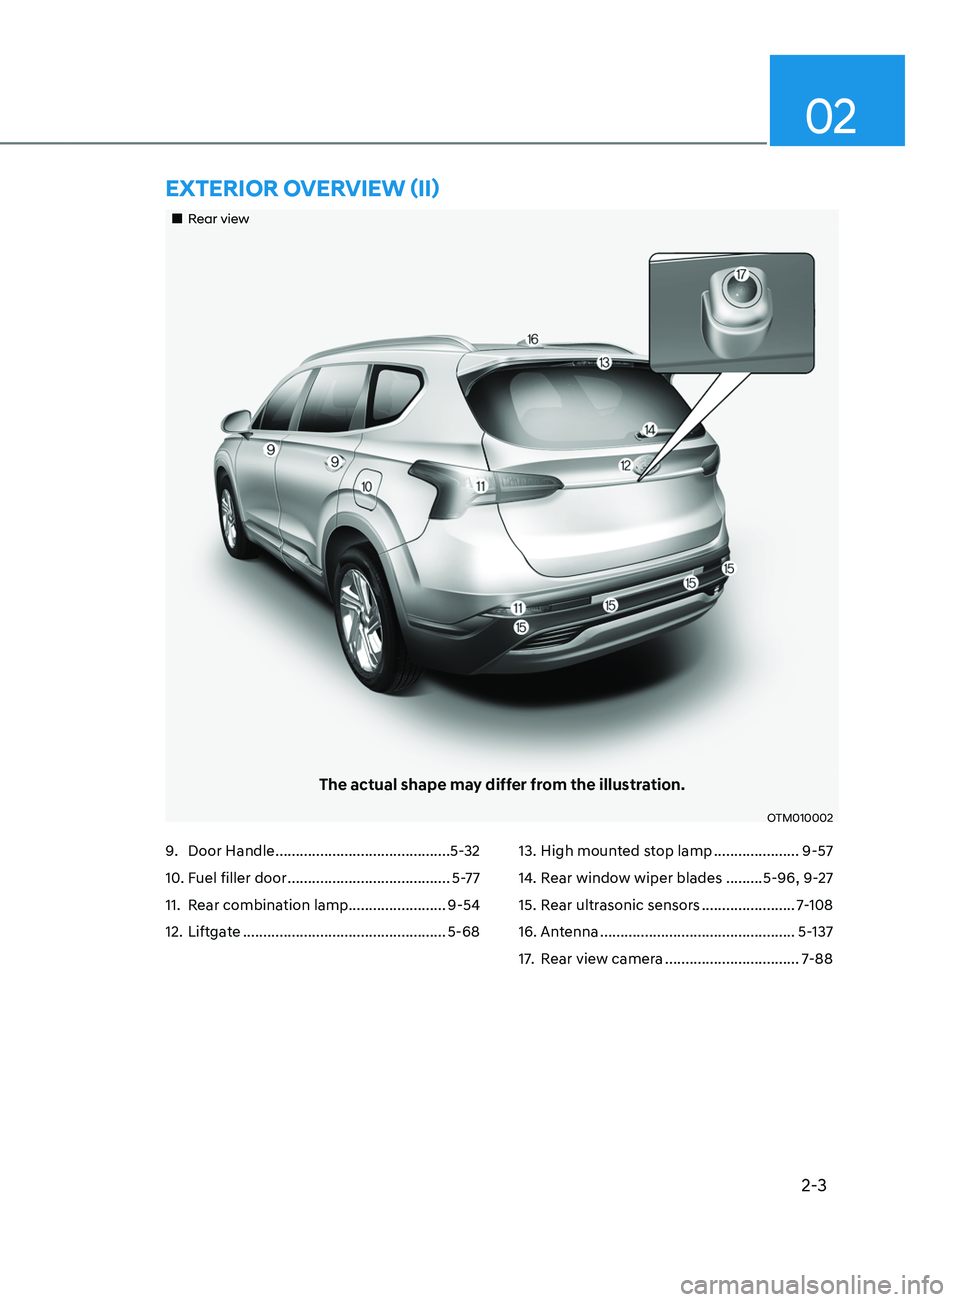 HYUNDAI SANTA FE 2021  Owners Manual 2-3
02
„„Rear view
The actual shape may differ from the illustration.
OTM010002
ExTERIOR OVERVIEW (II)
9. Door Handle ...........................................5- 32
10.
 Fuel filler door .